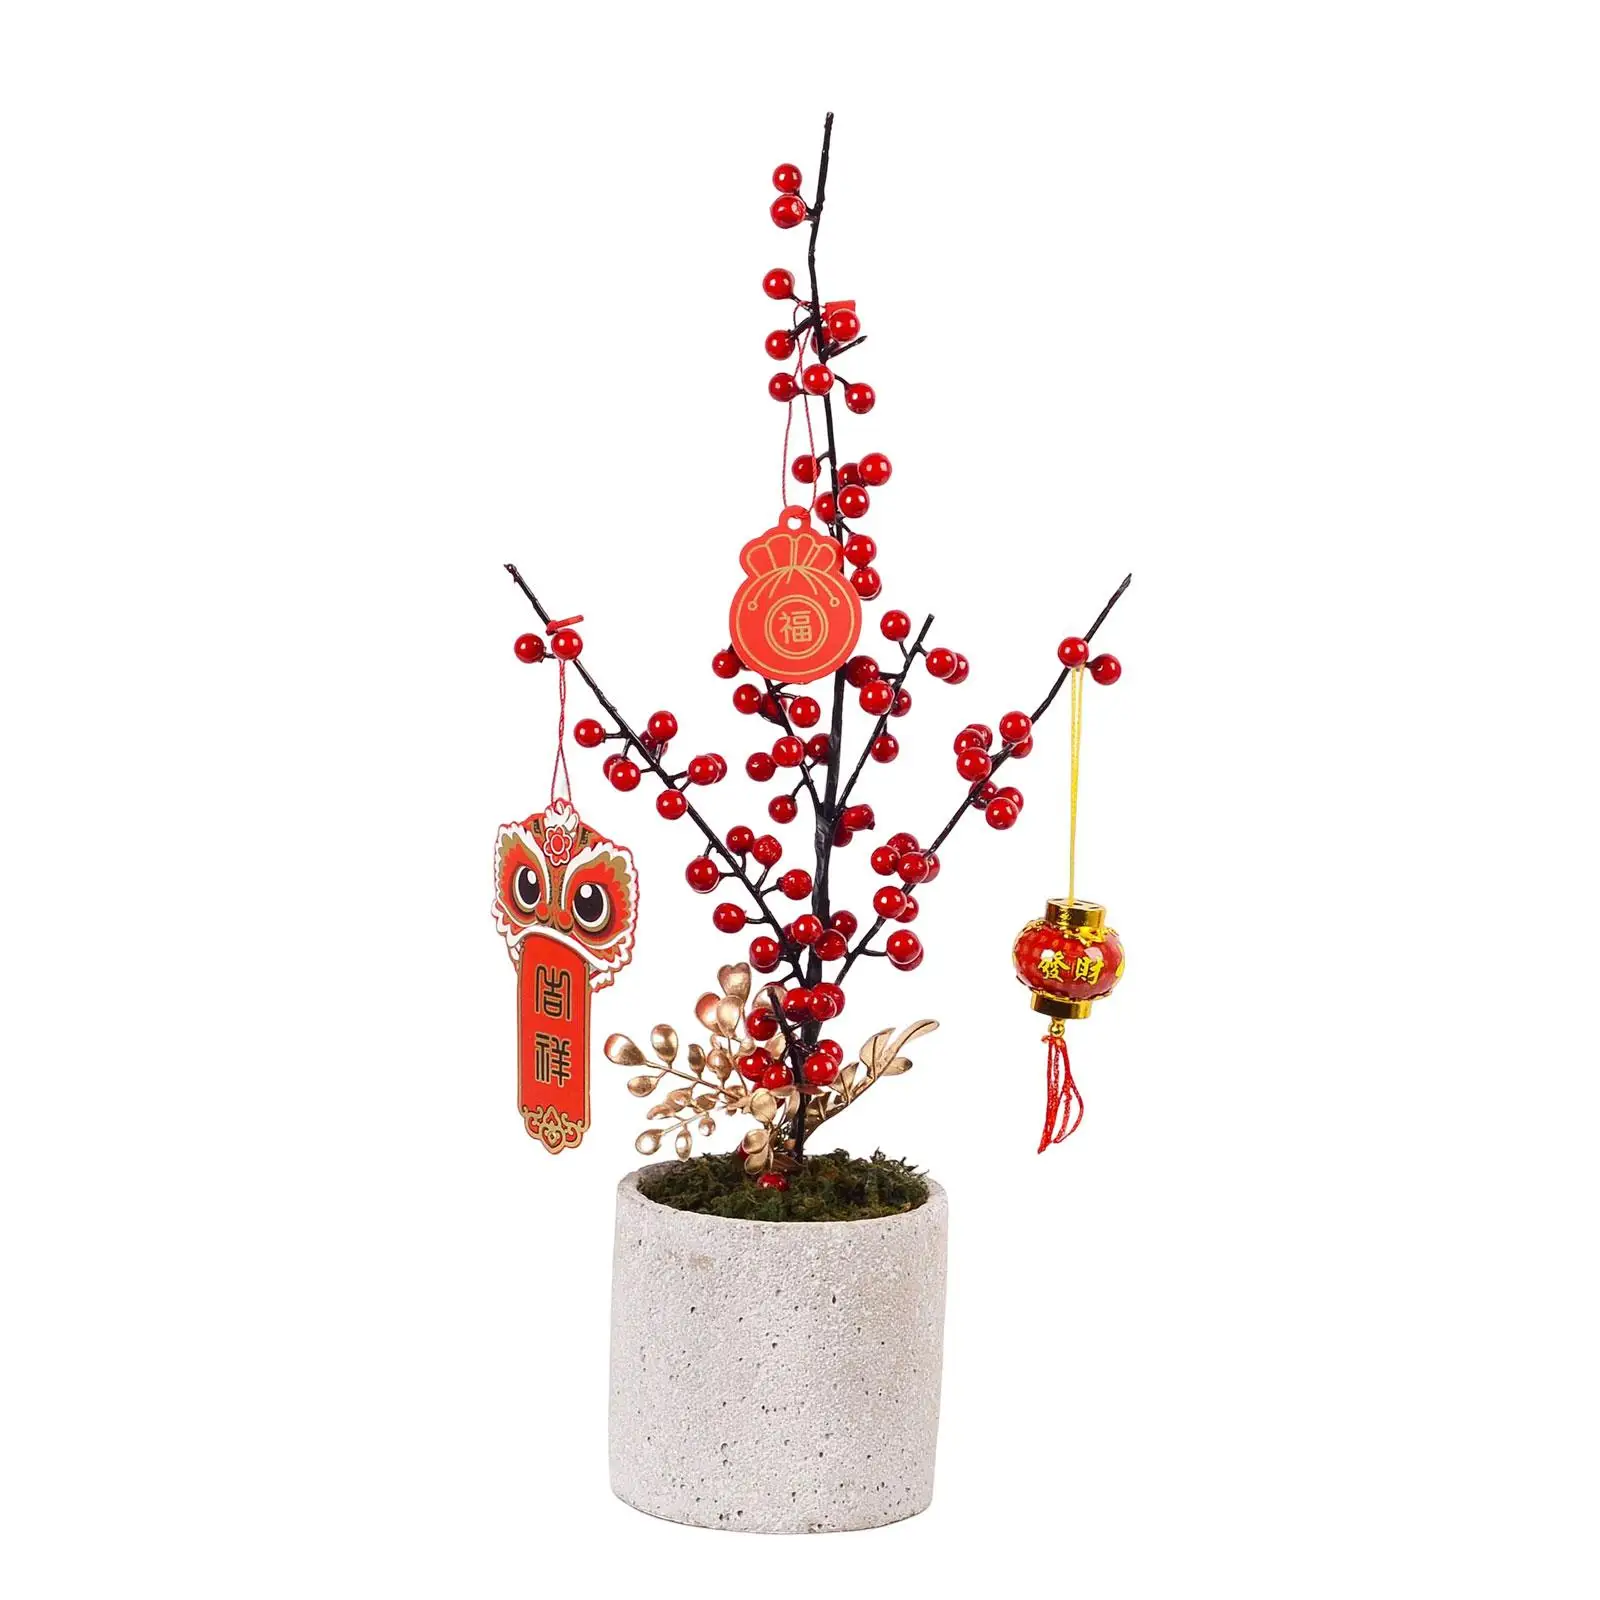 Artificial Potted Flower Bonsai Decoration Table Centerpiece Chinese New Year Ornaments for Wedding Hotel Party Holiday Home